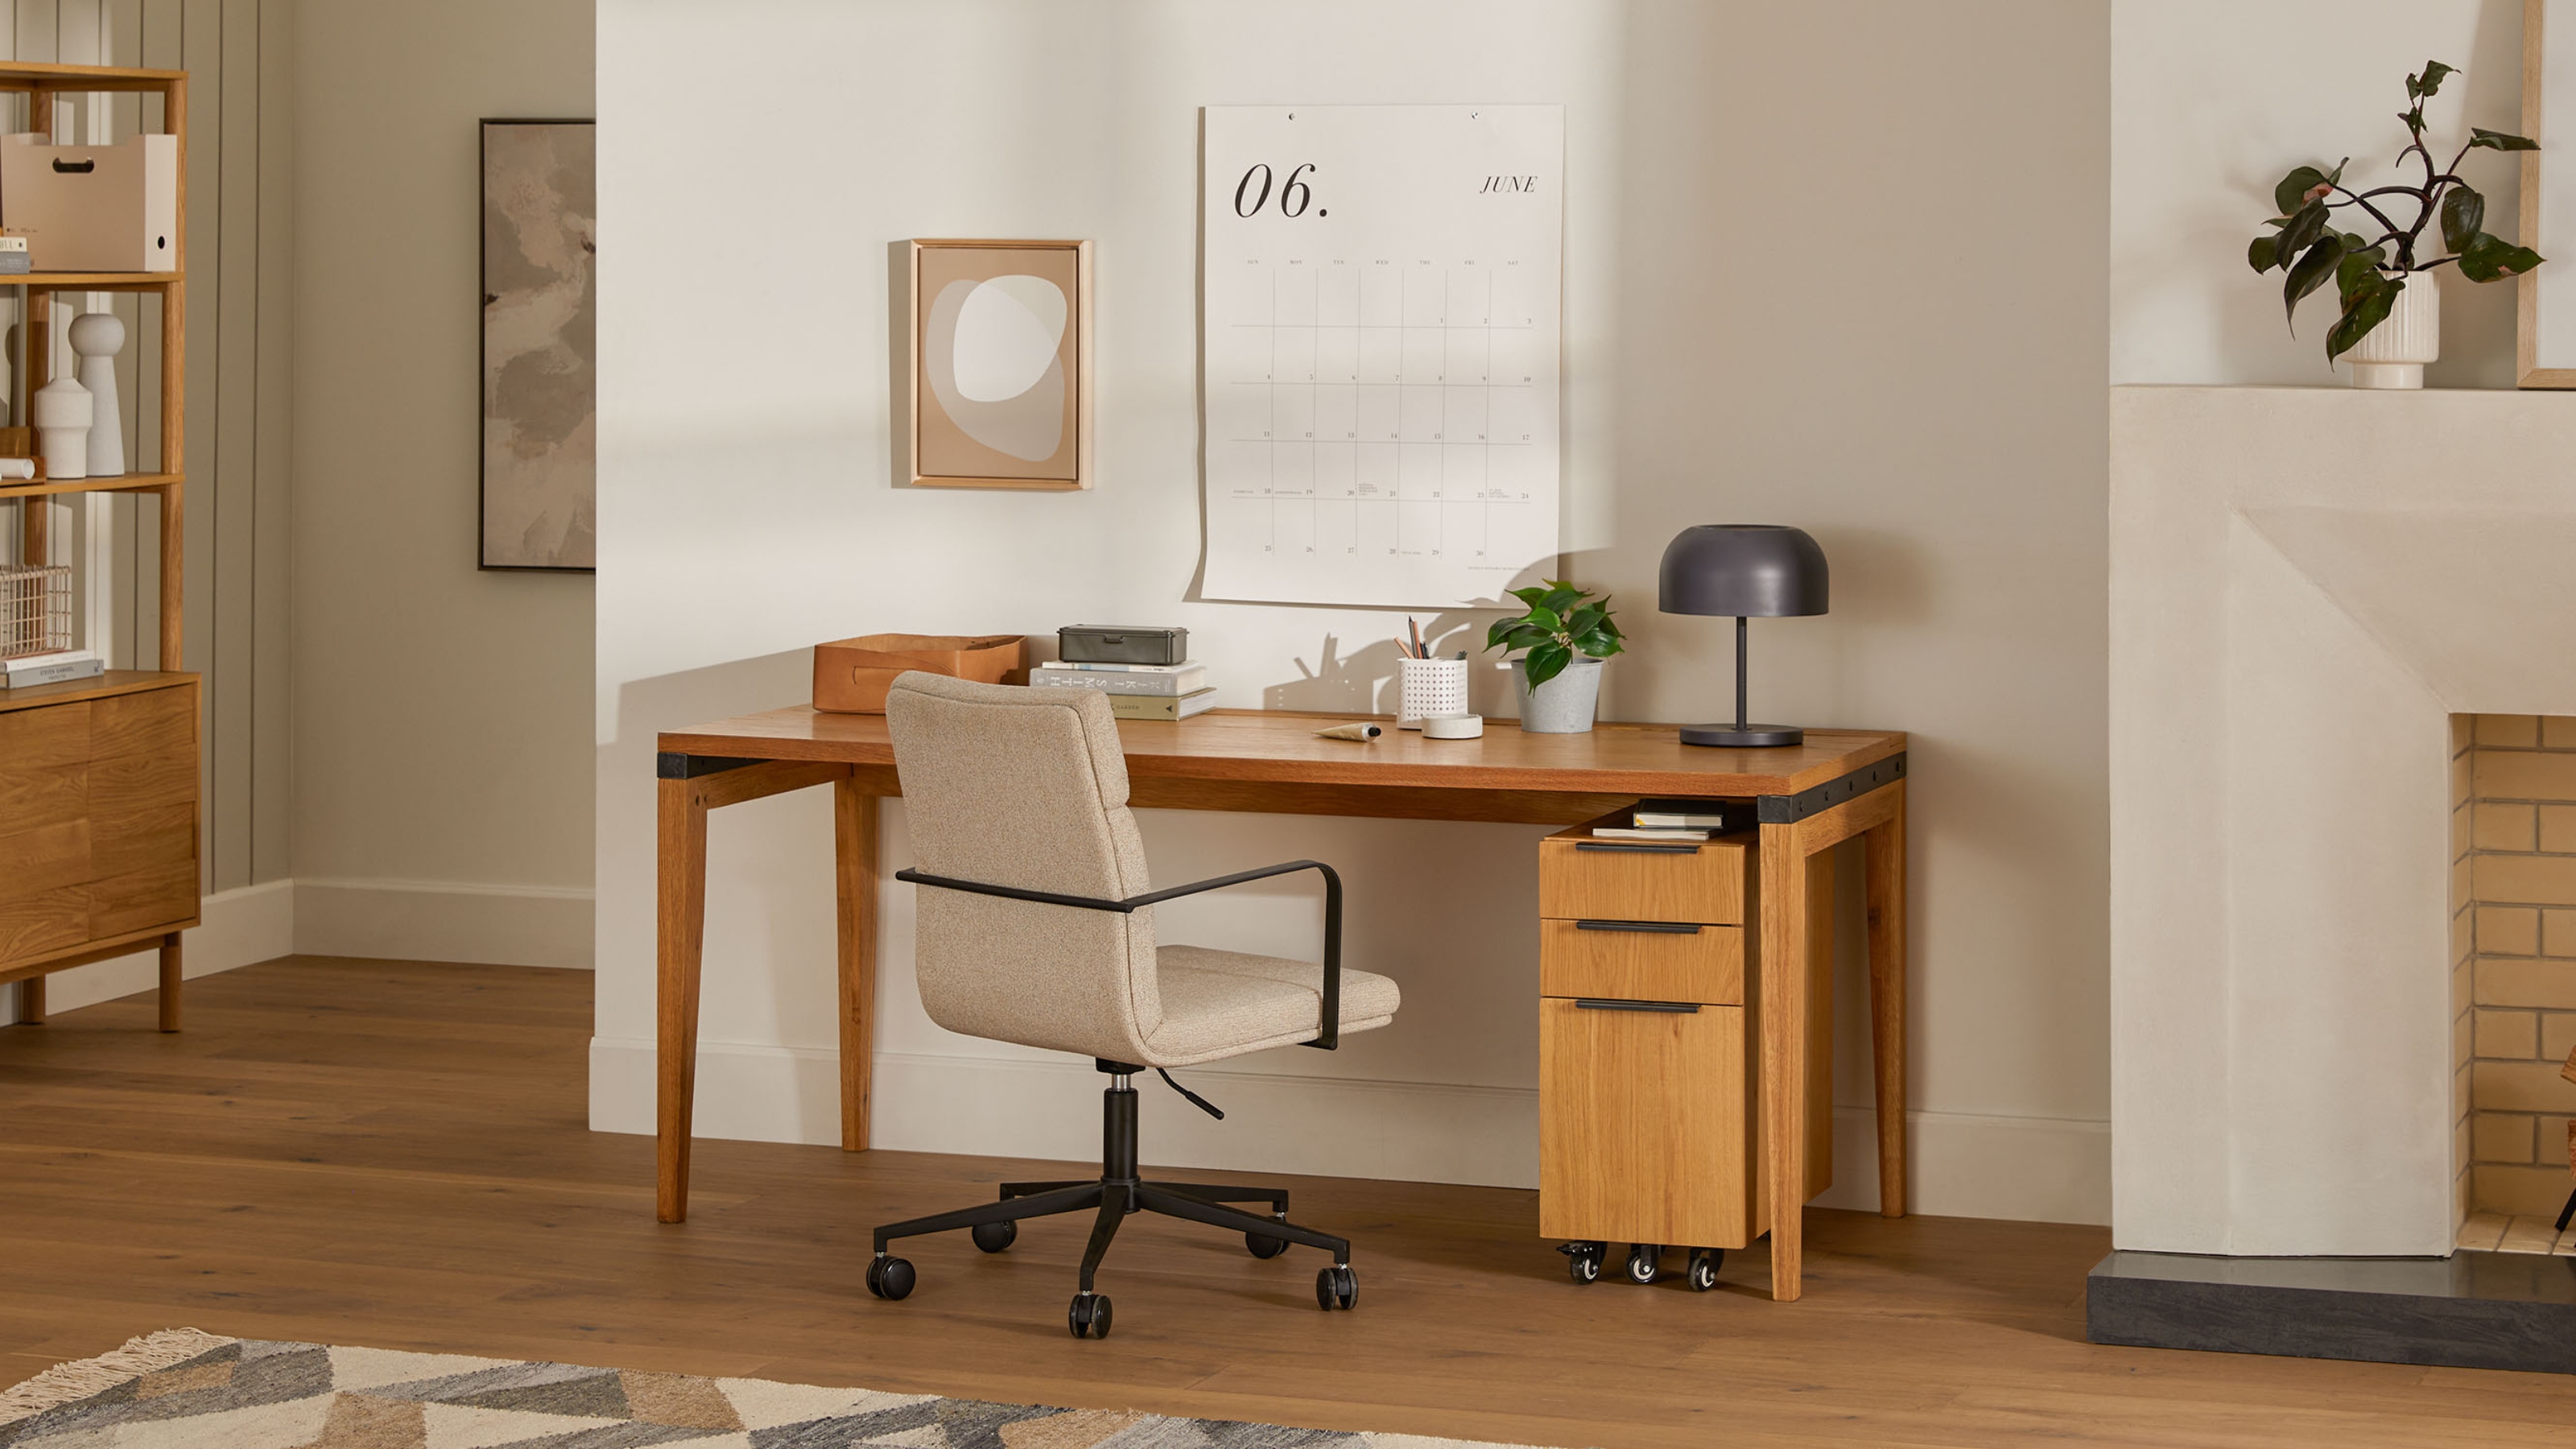 21 Small Office Ideas To Make Any WFH Situation Work